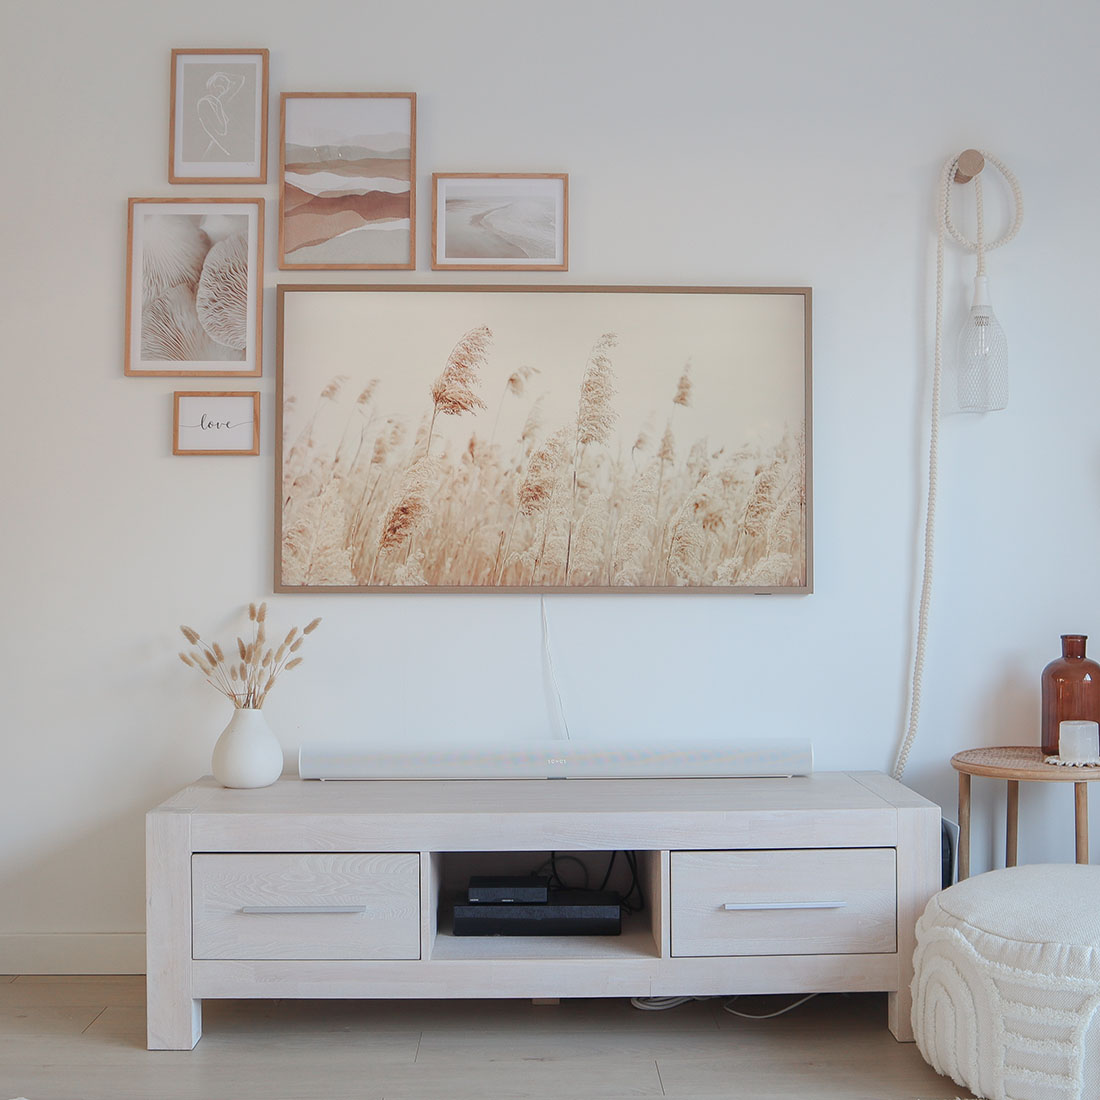 A neutral gallery wall around the Samsung Frame TV